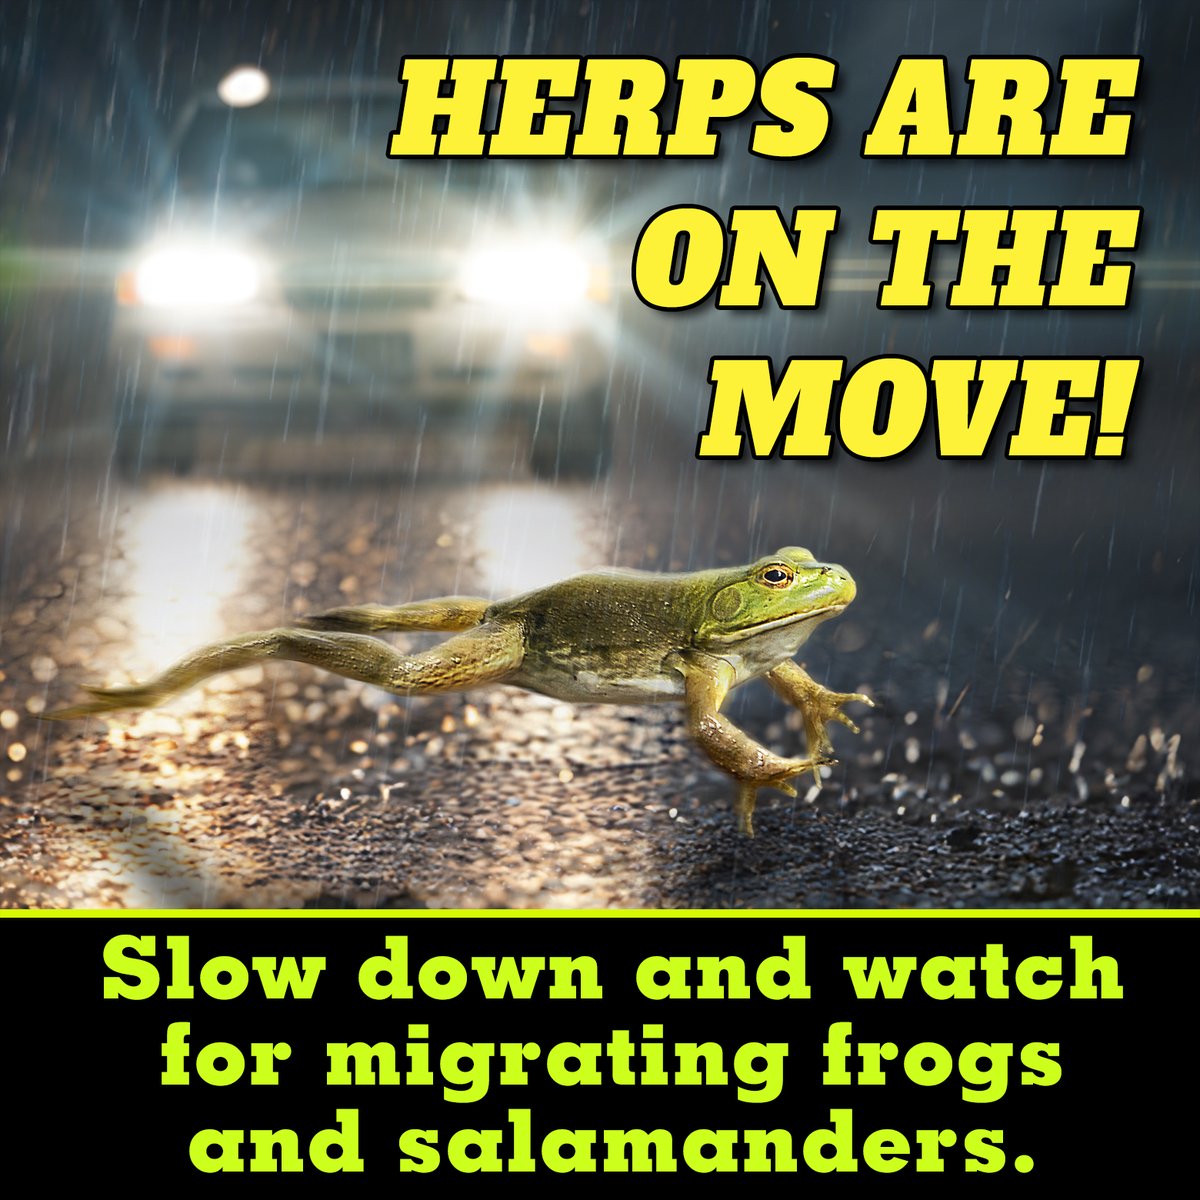 Herps are on the move! Please drive carefully, especially on rainy evenings.